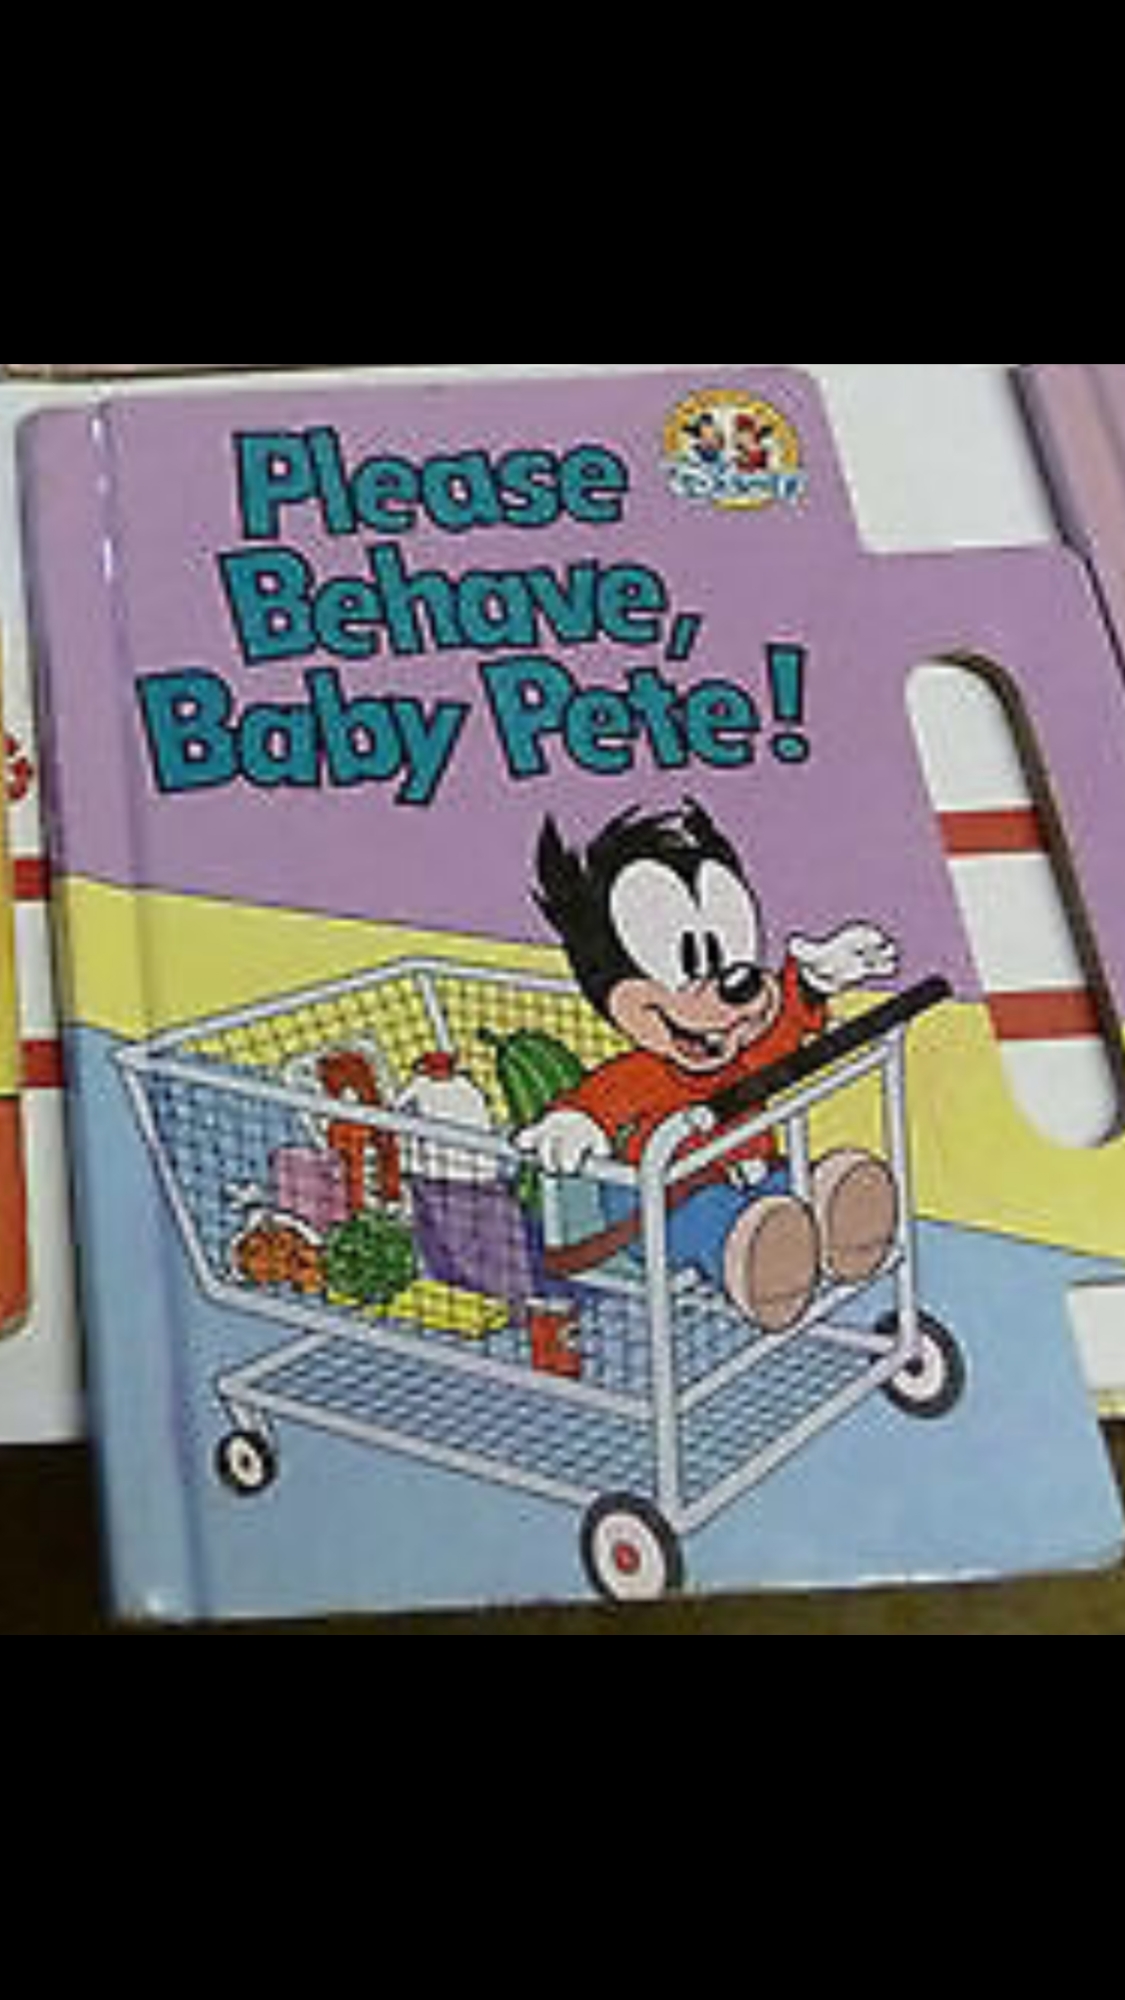 Disney Babies Out And Around . Please Behave Baby Pete , in Roland